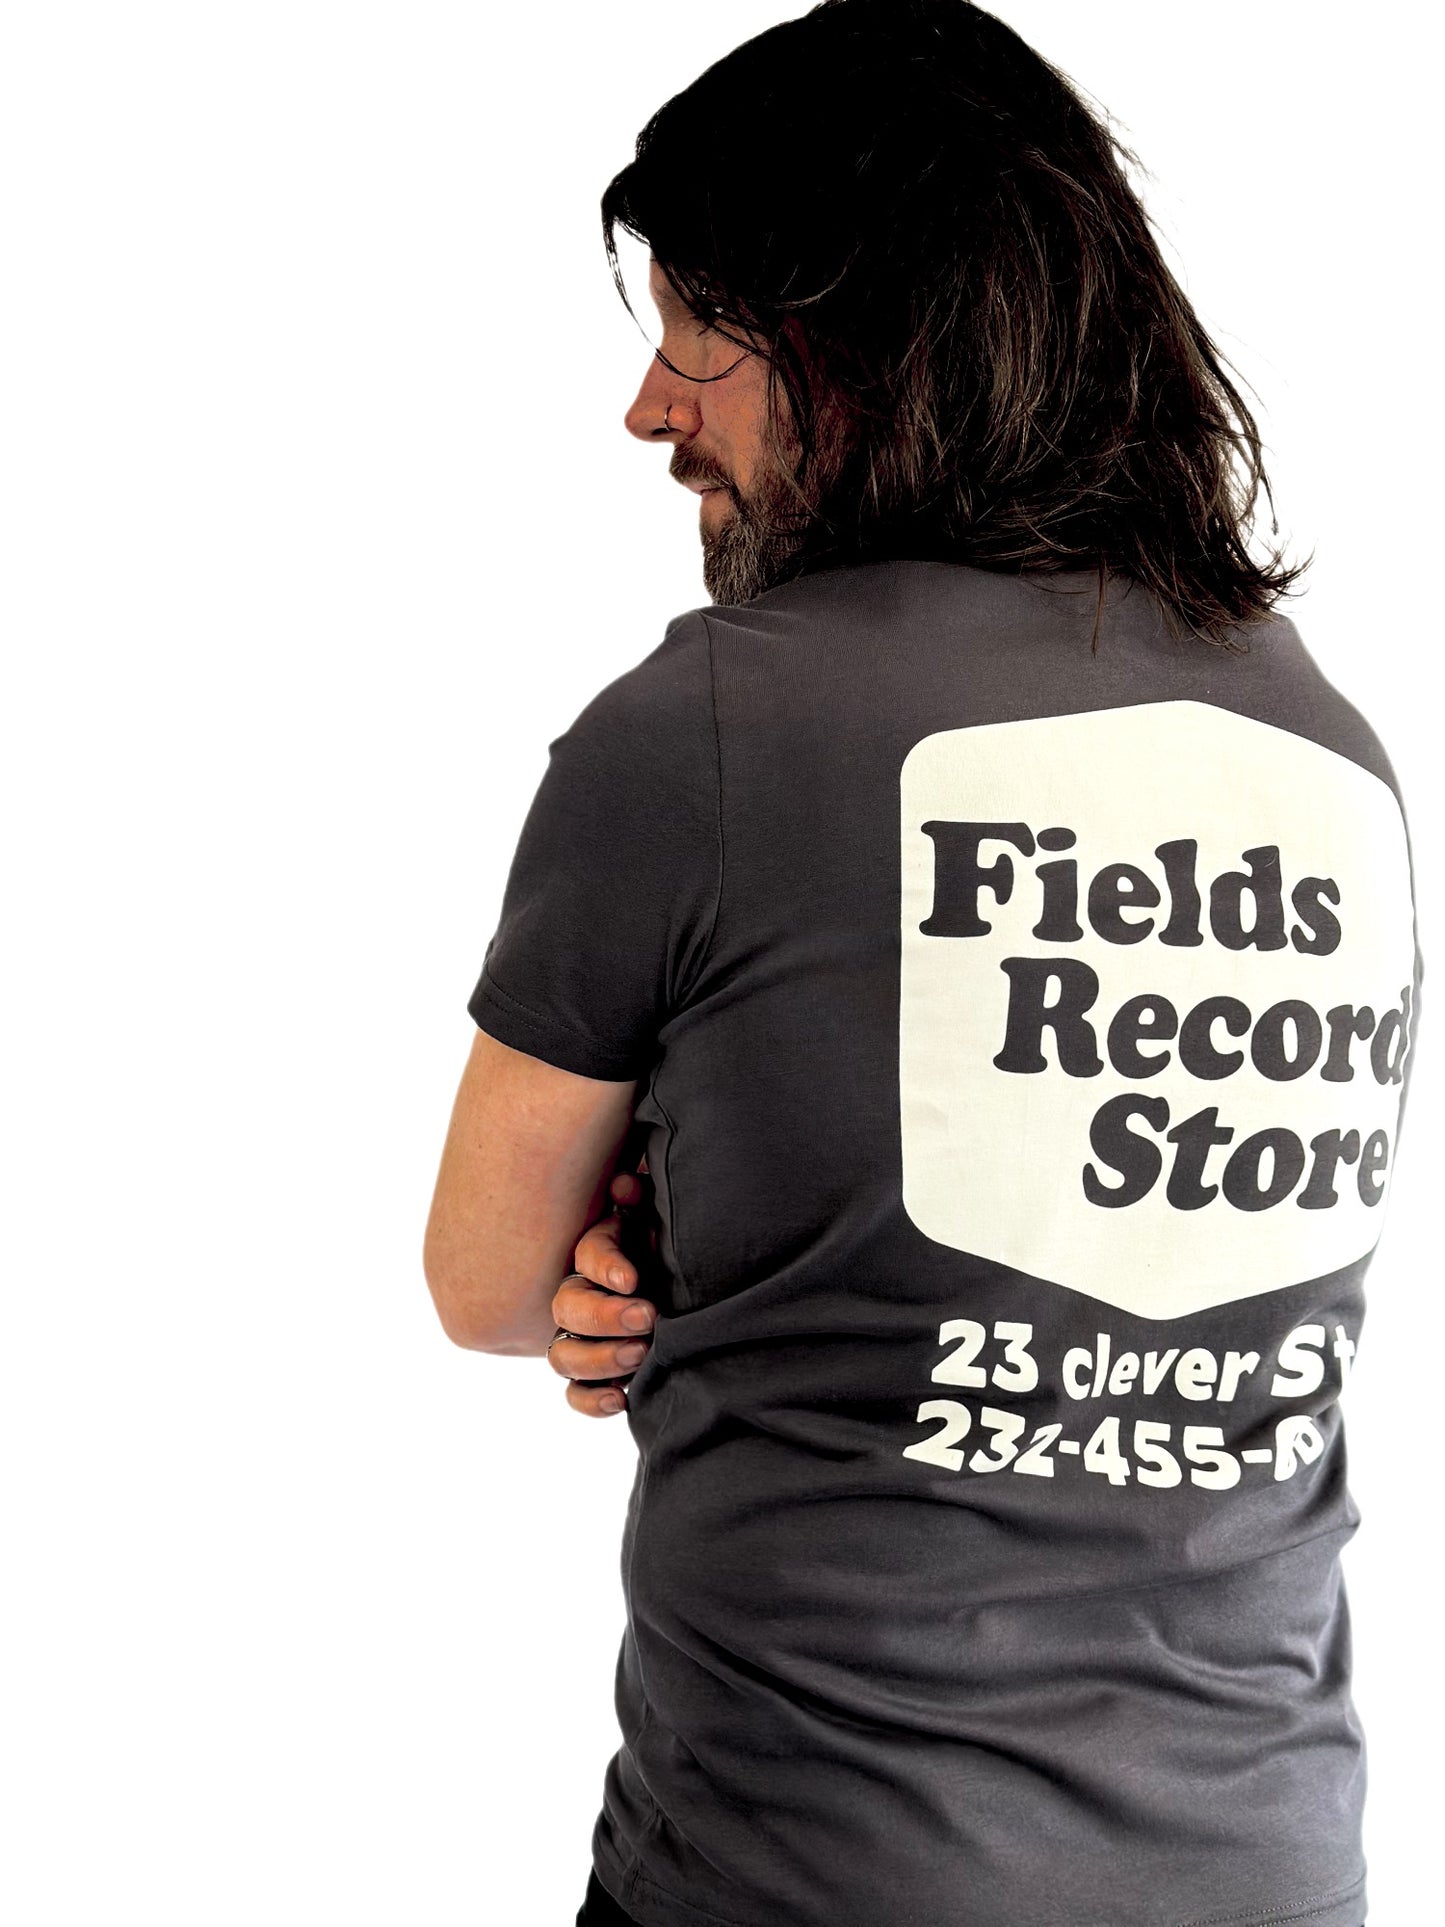 'Record Store' Tee